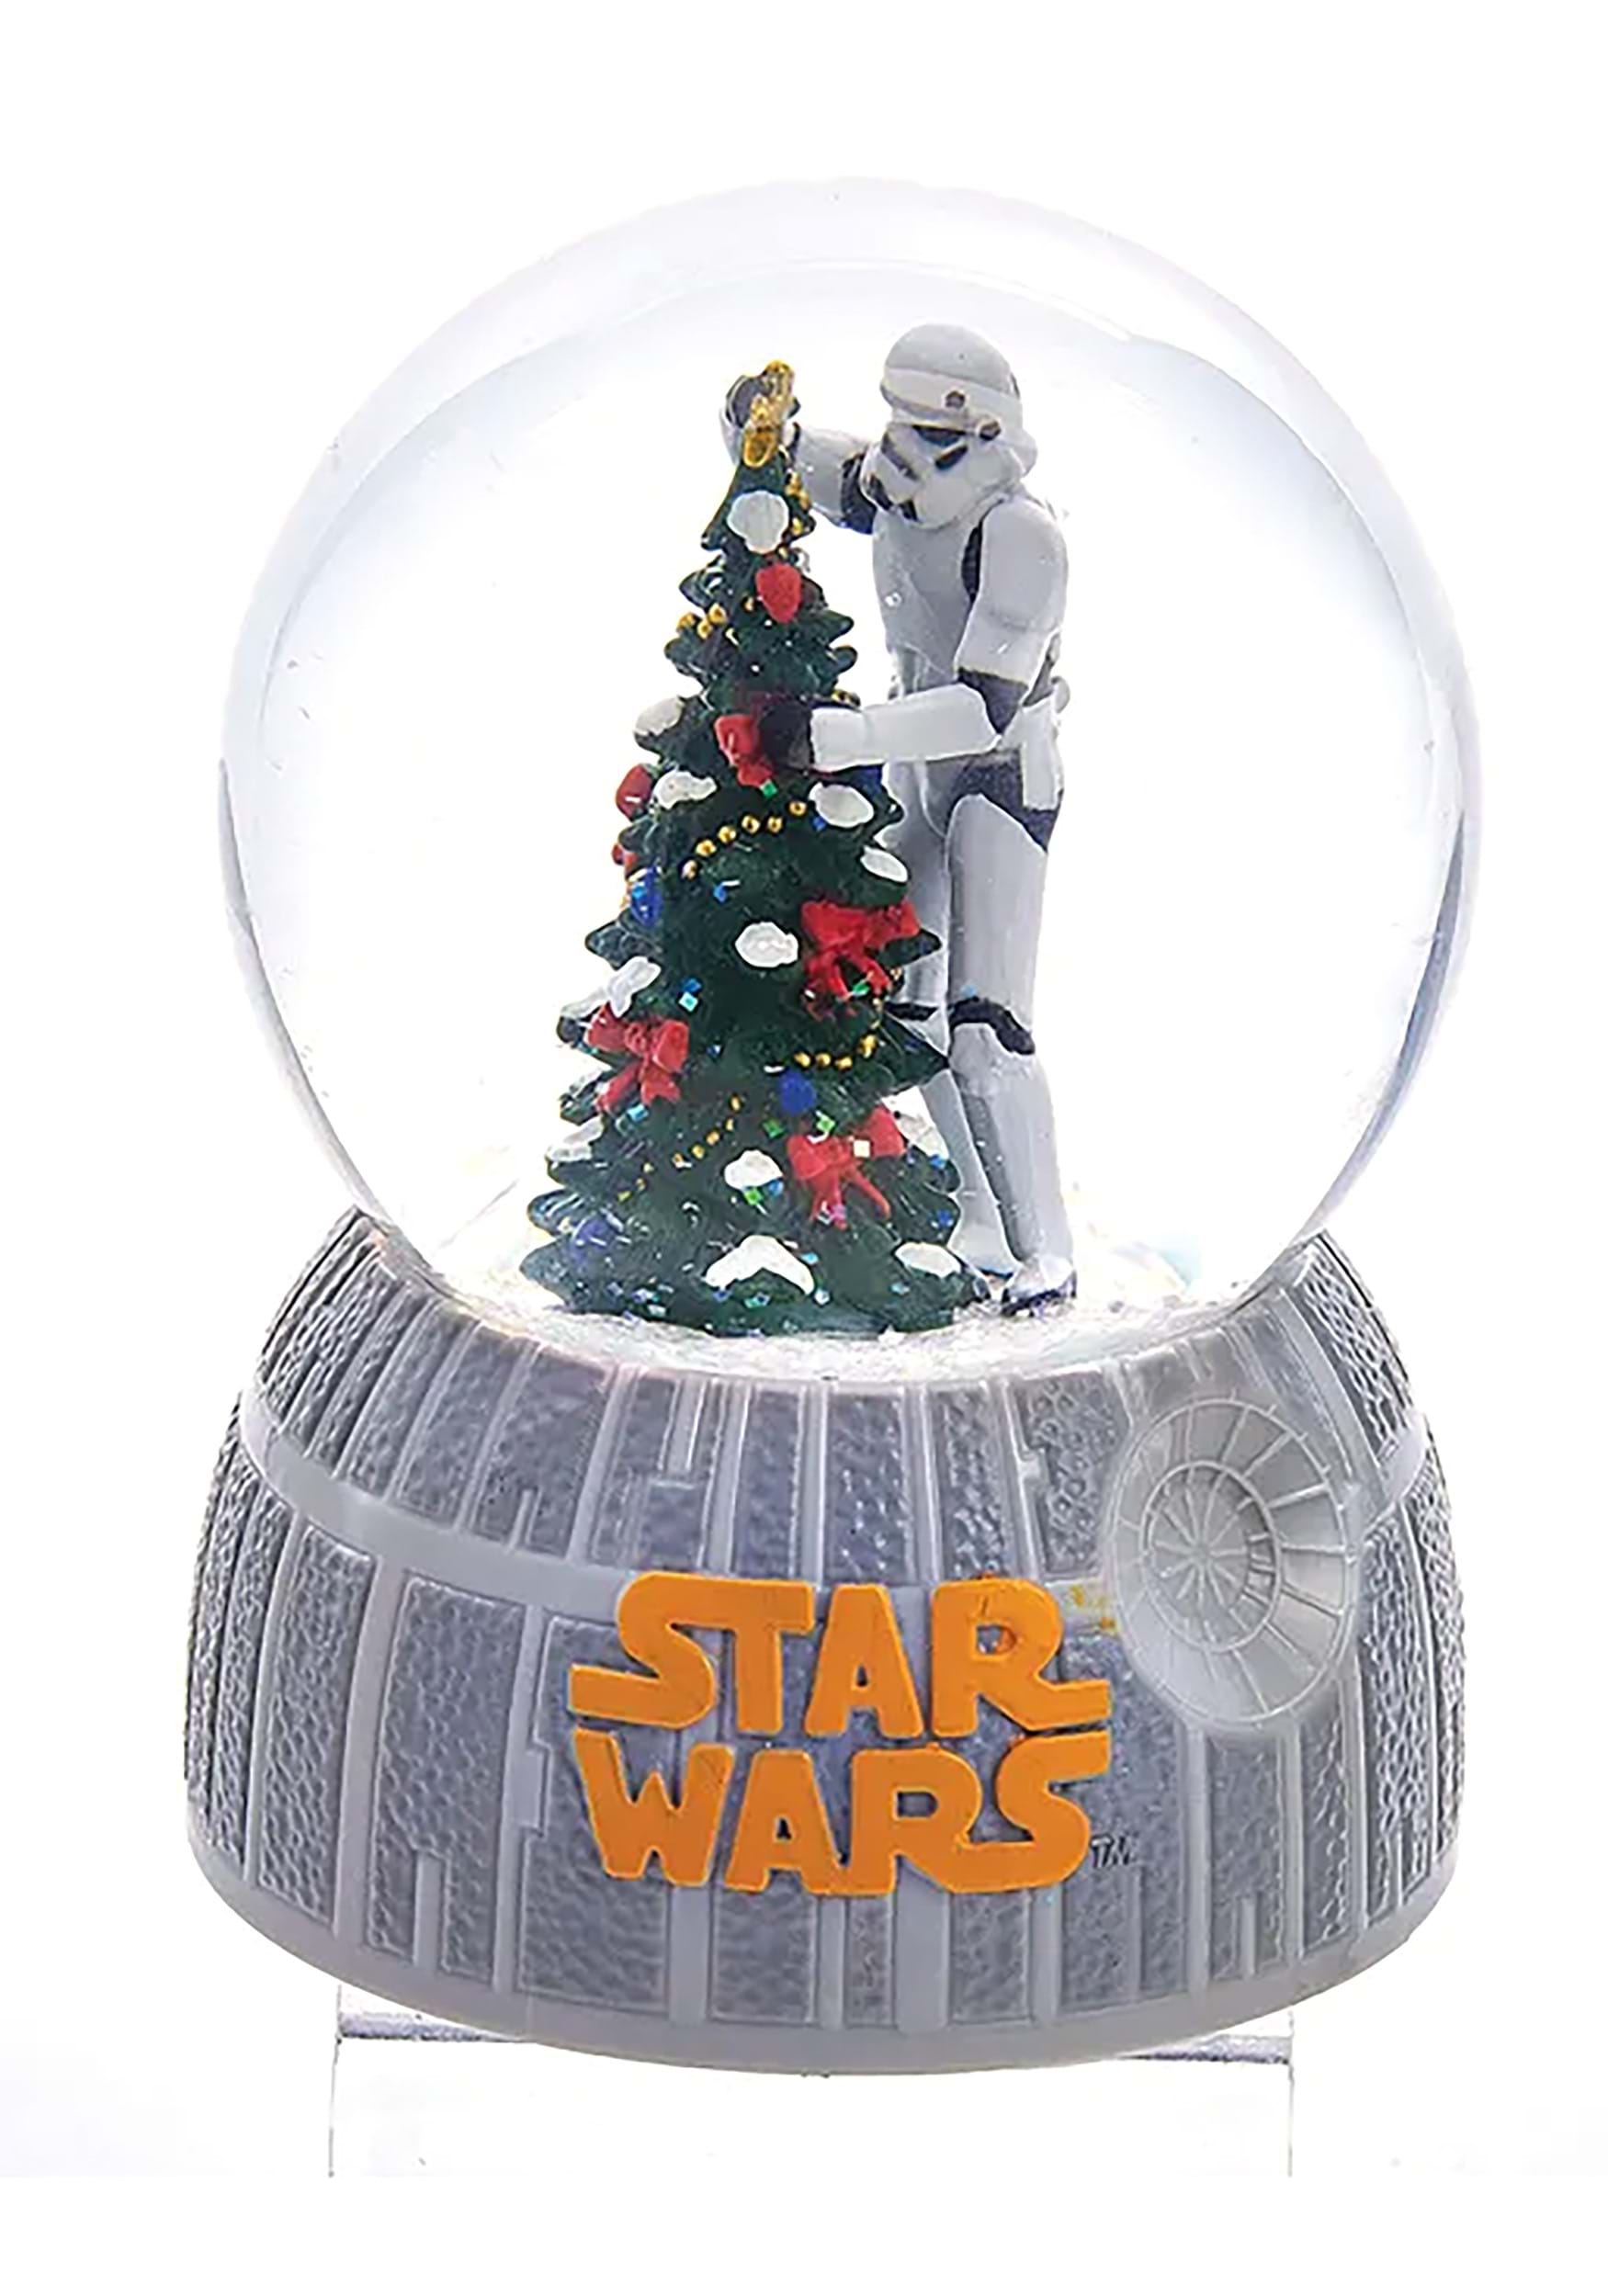 https://images.fun.com/products/85762/1-1/star-wars-stormtrooper-decorating-christmas-tree-m.jpg